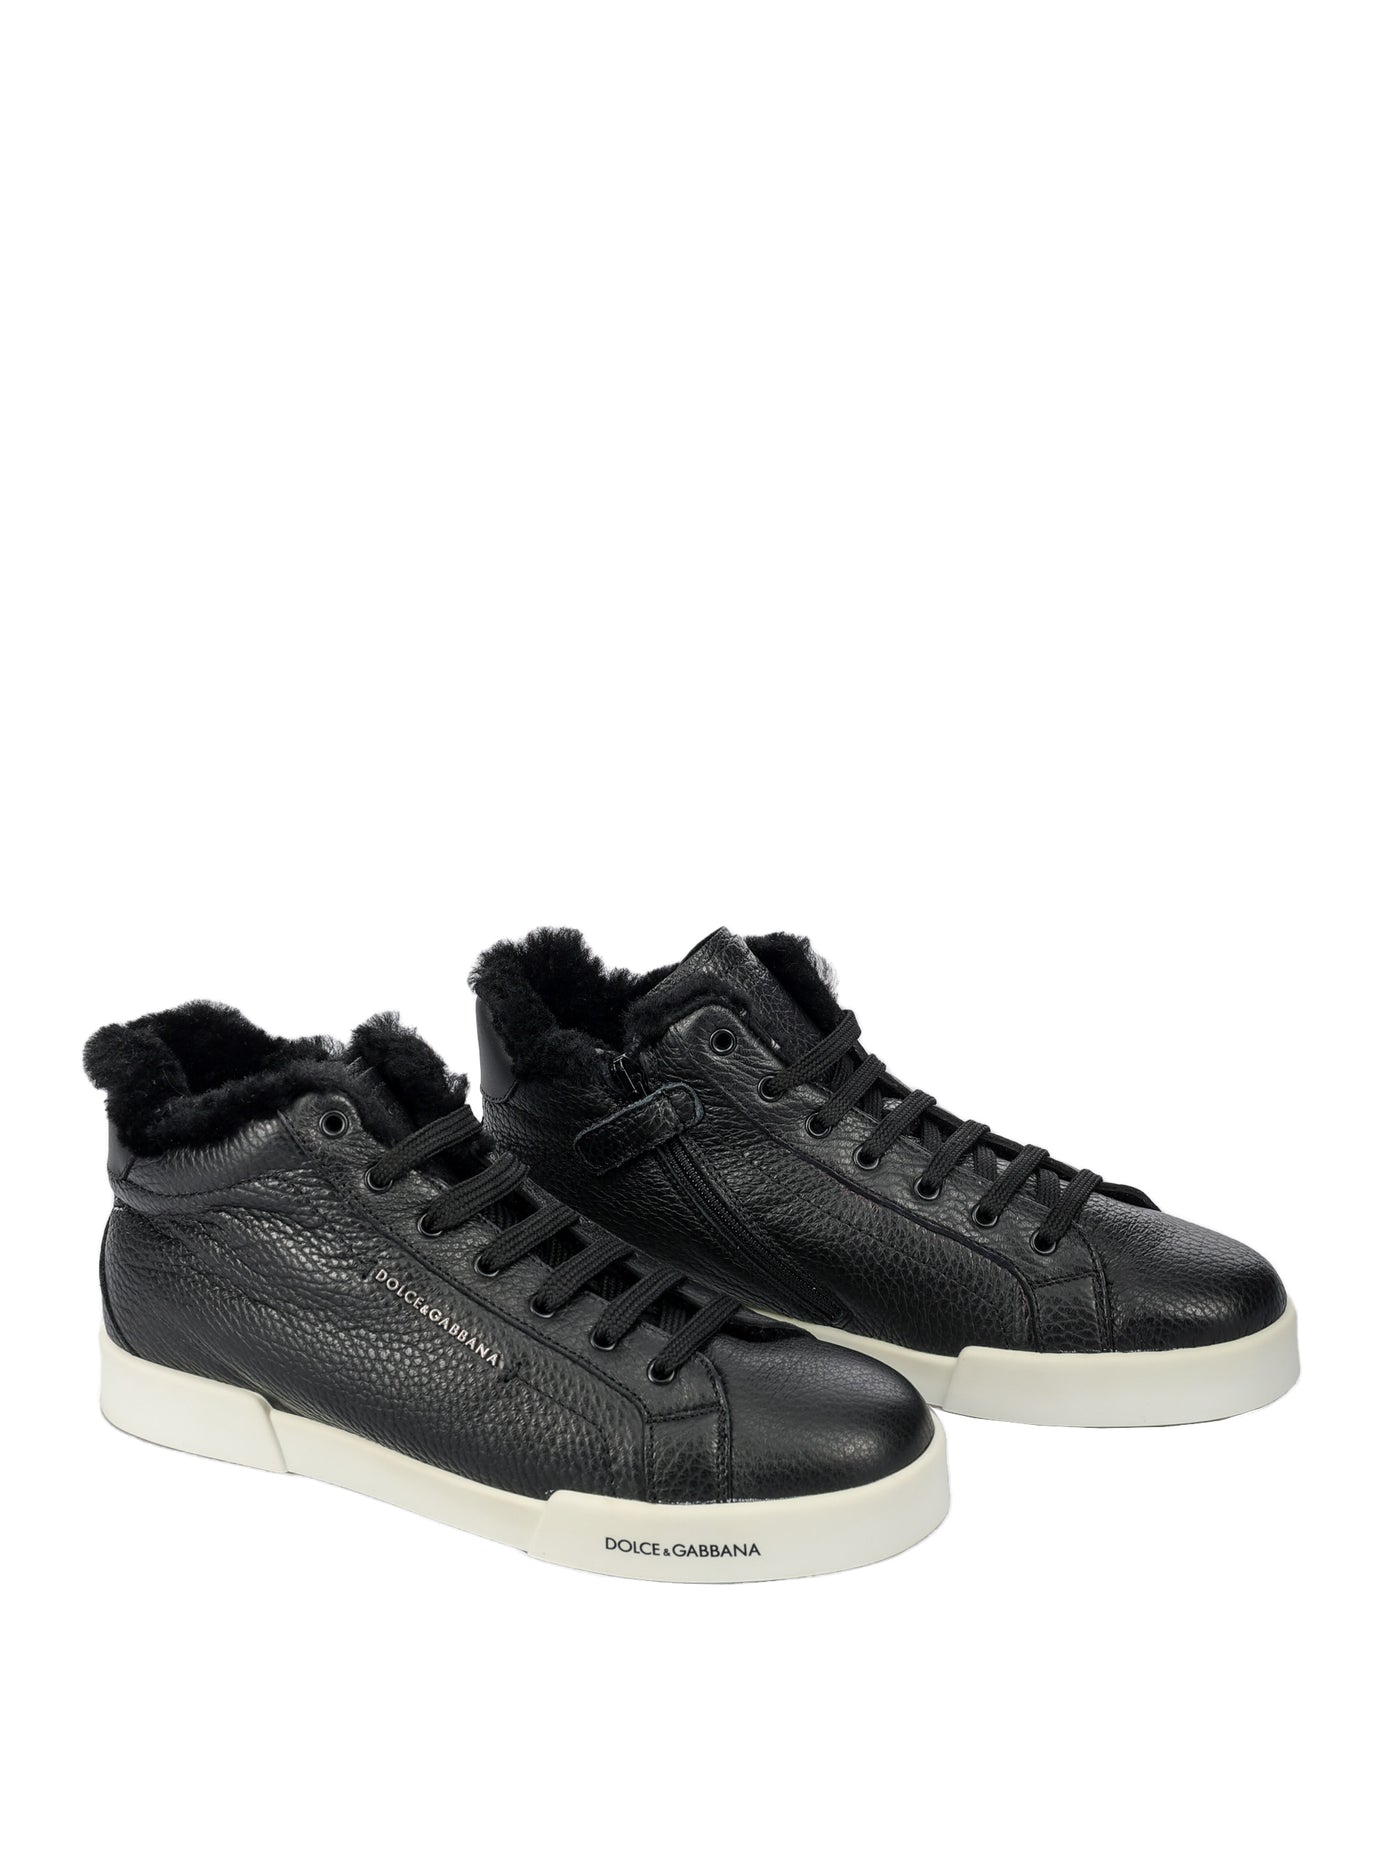 DOLCE & GABBANA KIDS LEATHER SNEAKERS